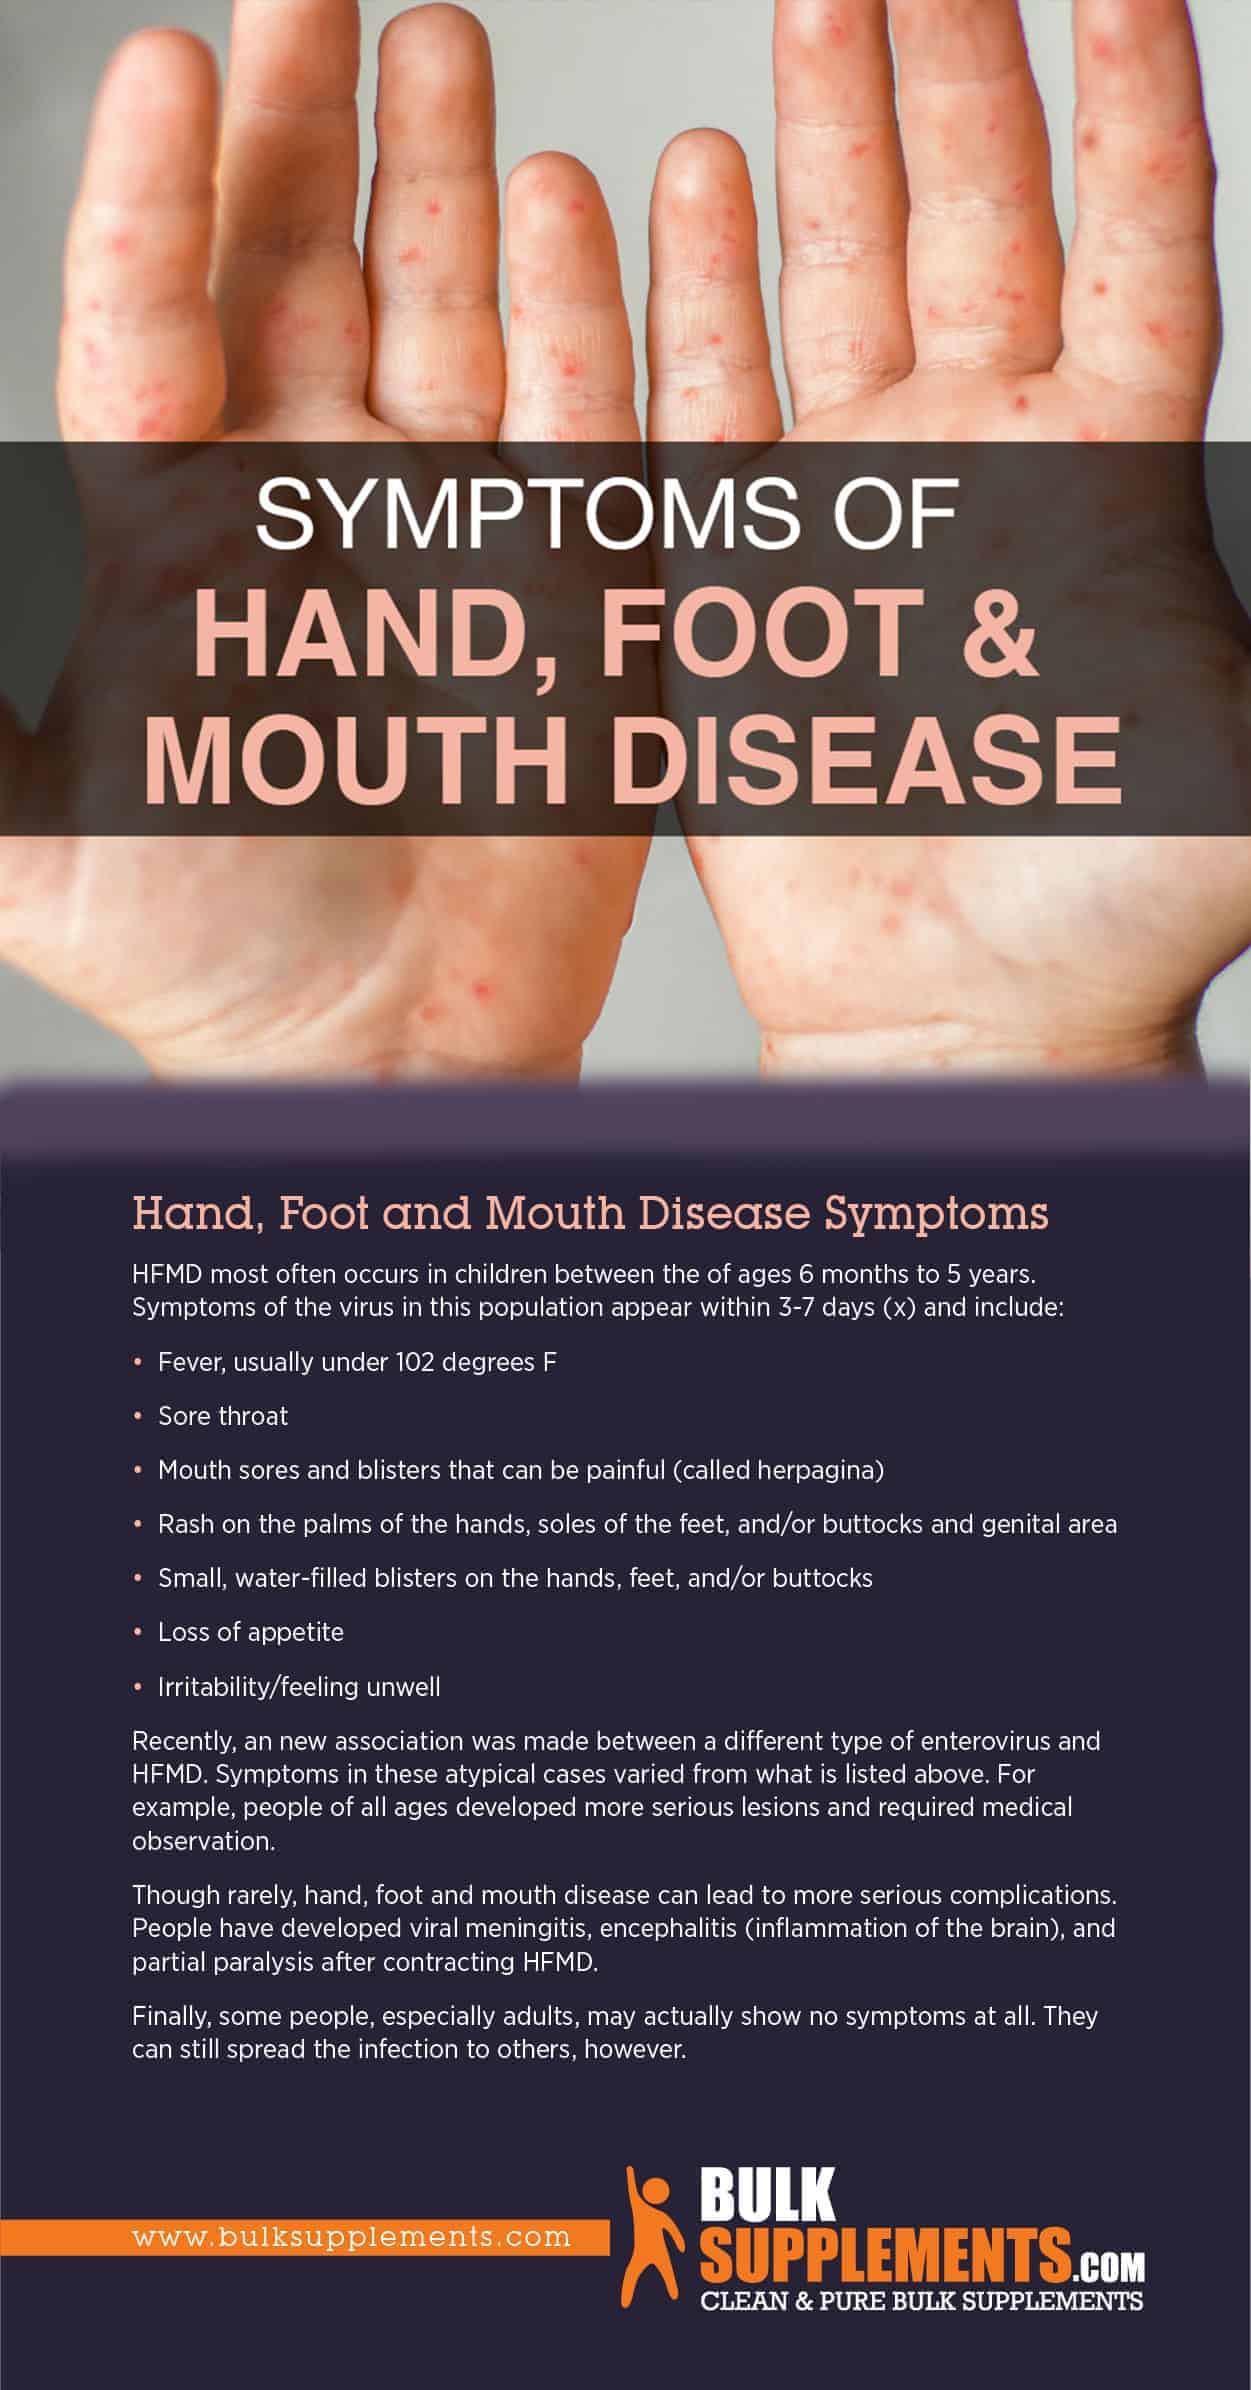 SYMPTOMS OF HAND, FOOT, AND MOUTH DISEASE